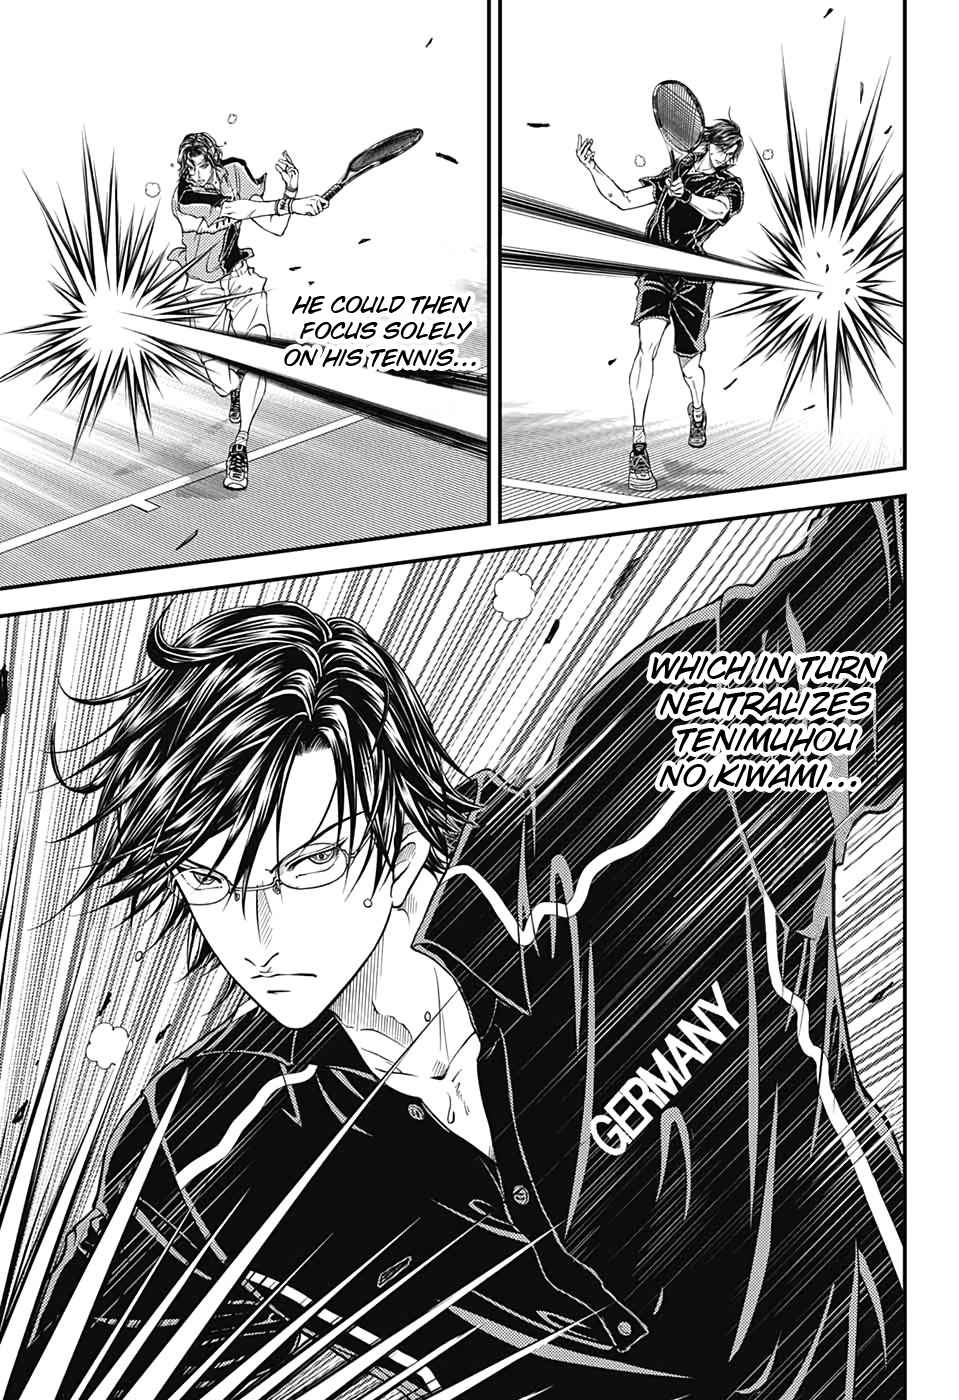 Shin Tennis no Oujisama Vol. 30 Ch. 303 For I Also Continued to Search for What's Beyond